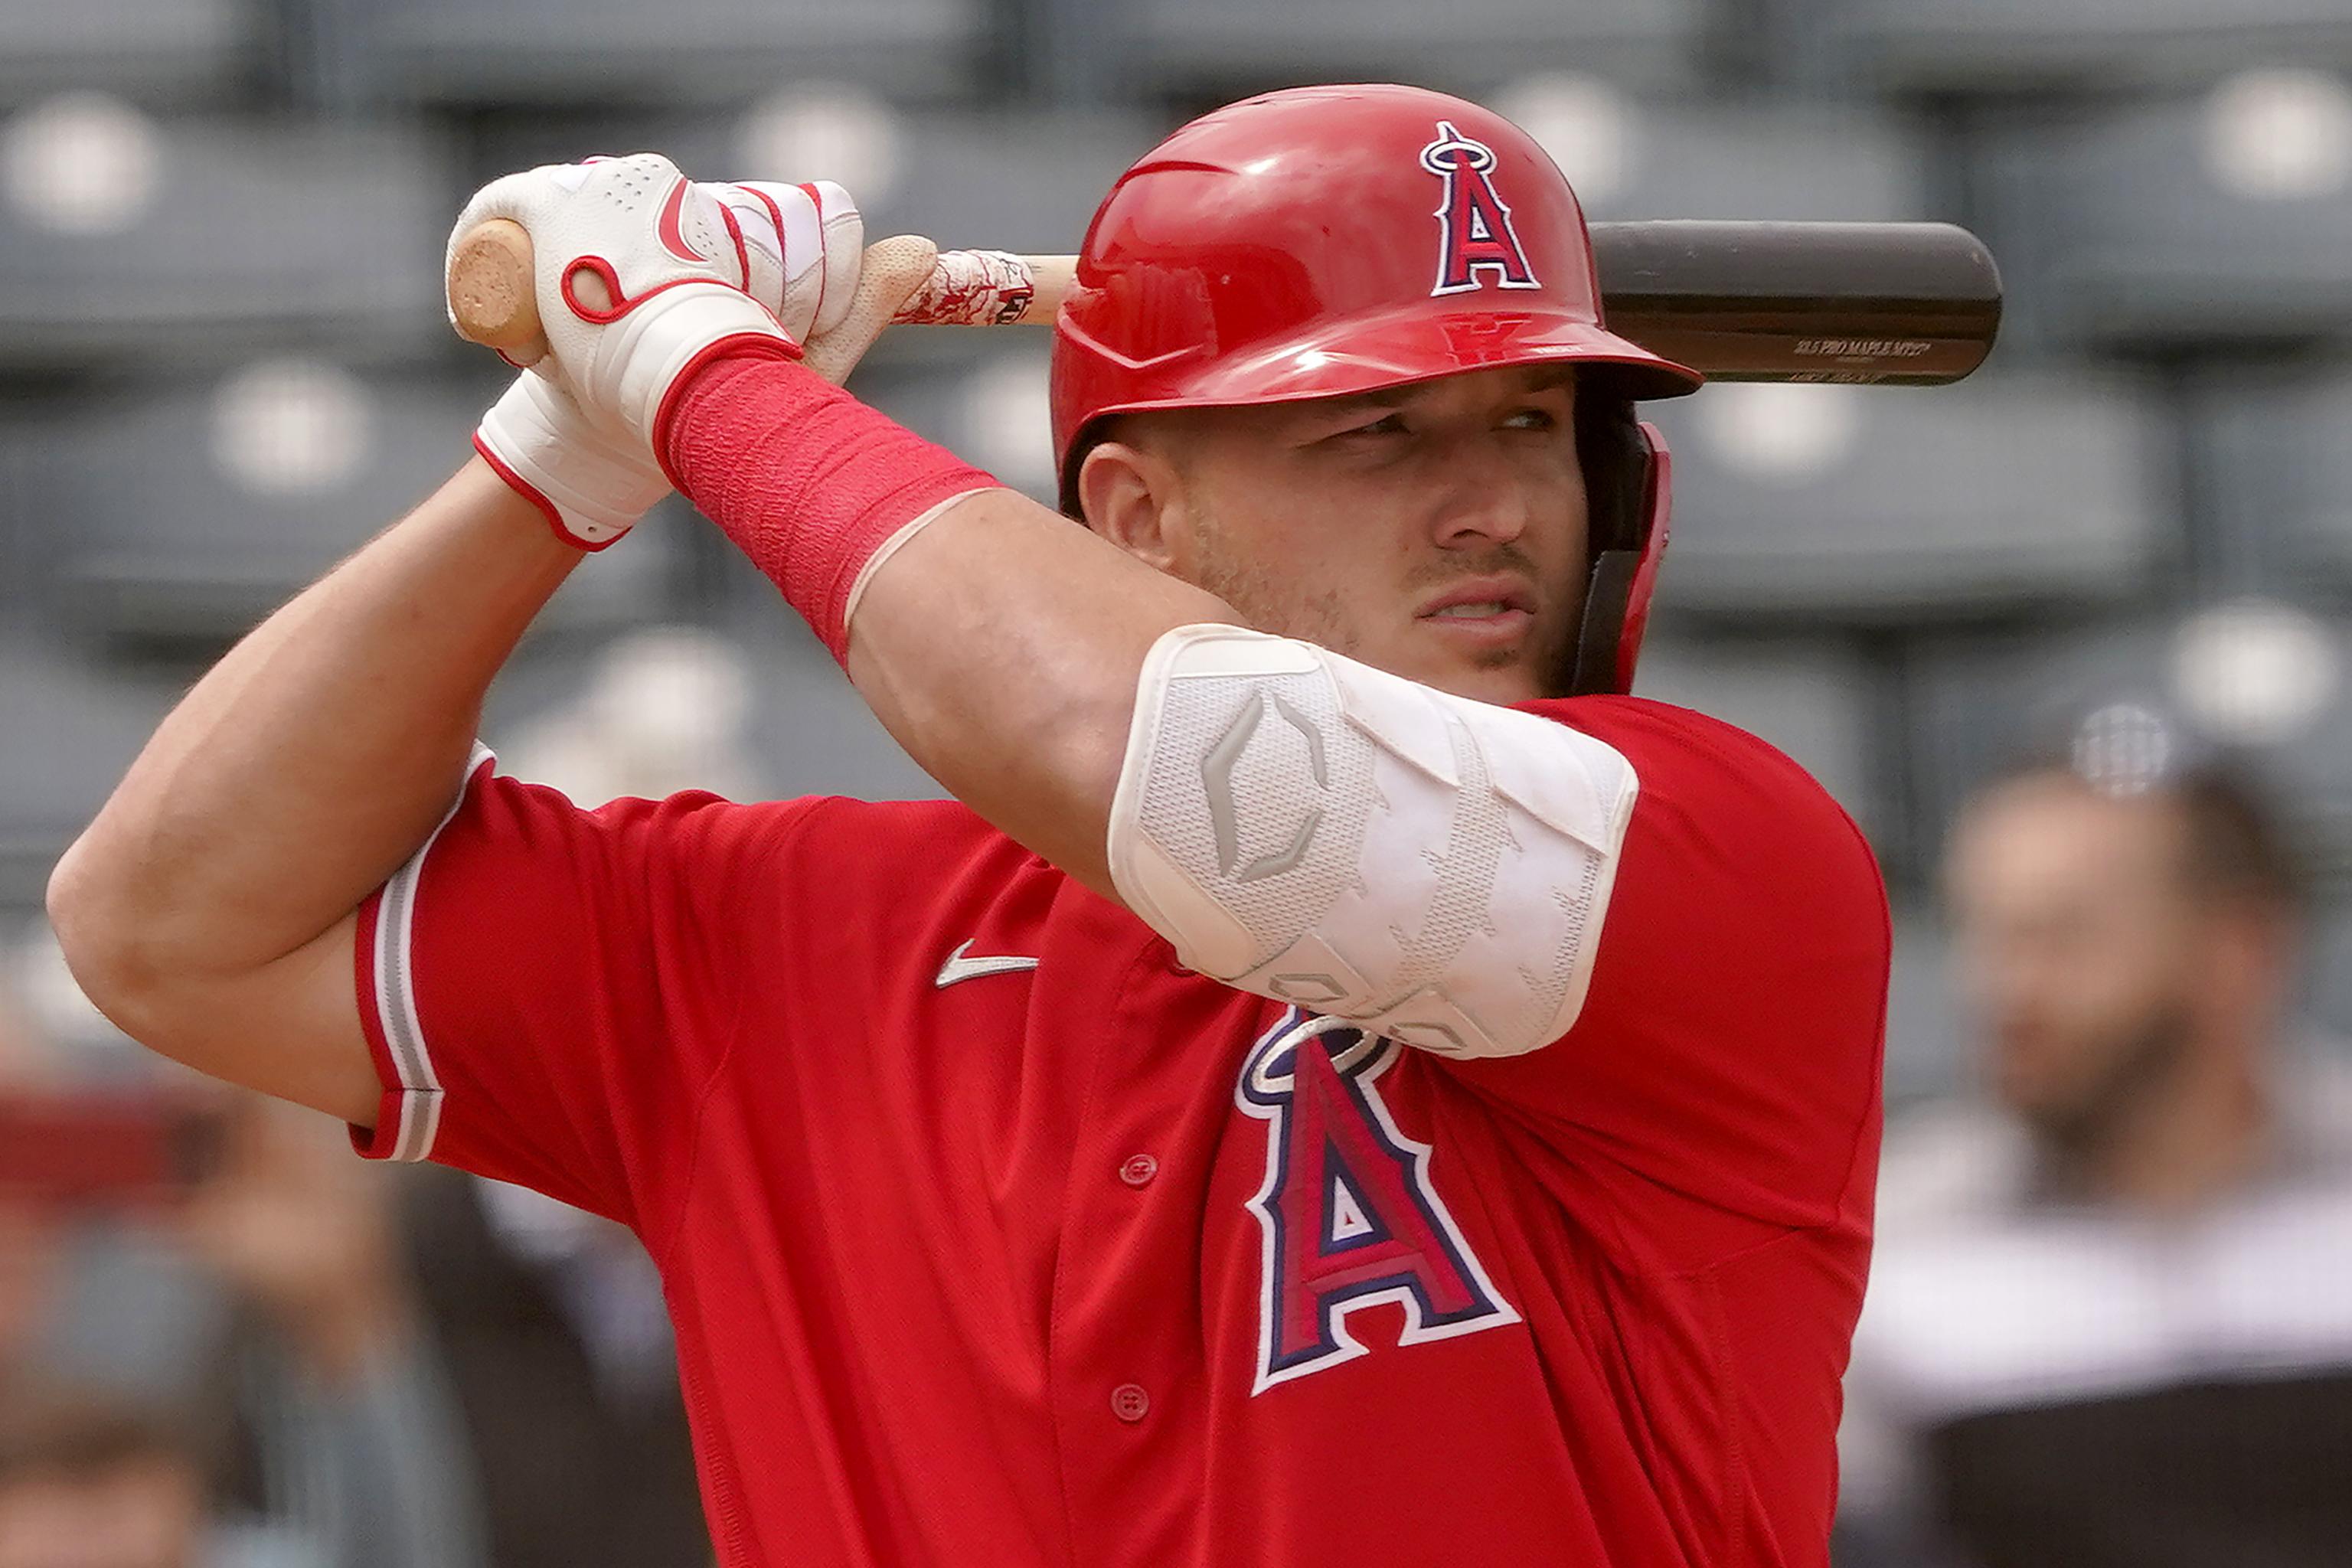 Mike Trout wants to play baseball, but says everybody has a